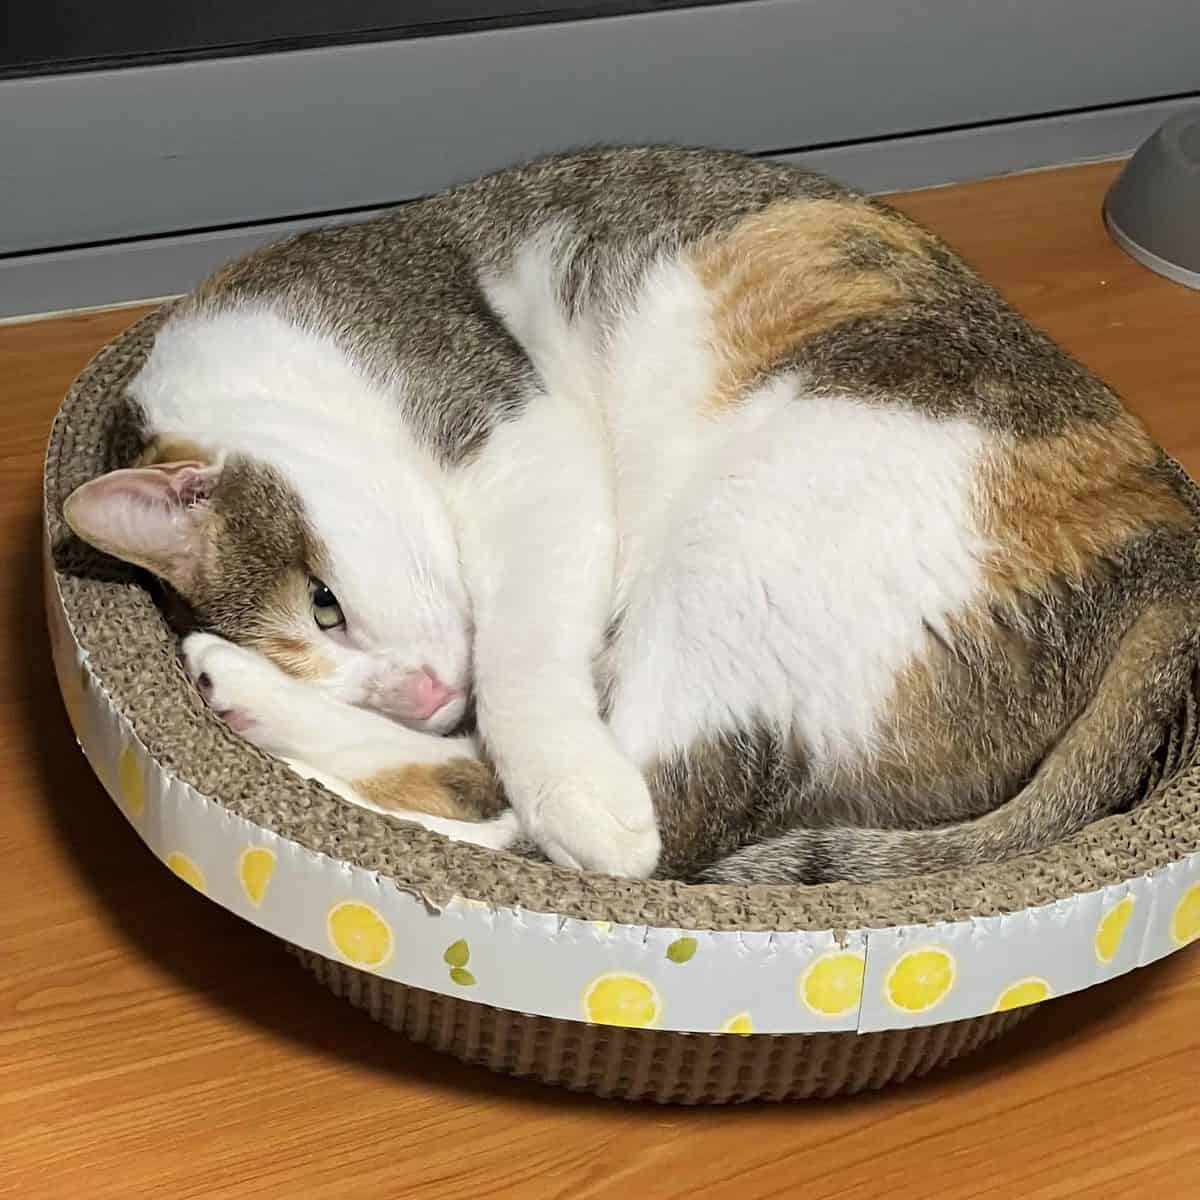 Calico cat curled up in basket, with one eye open